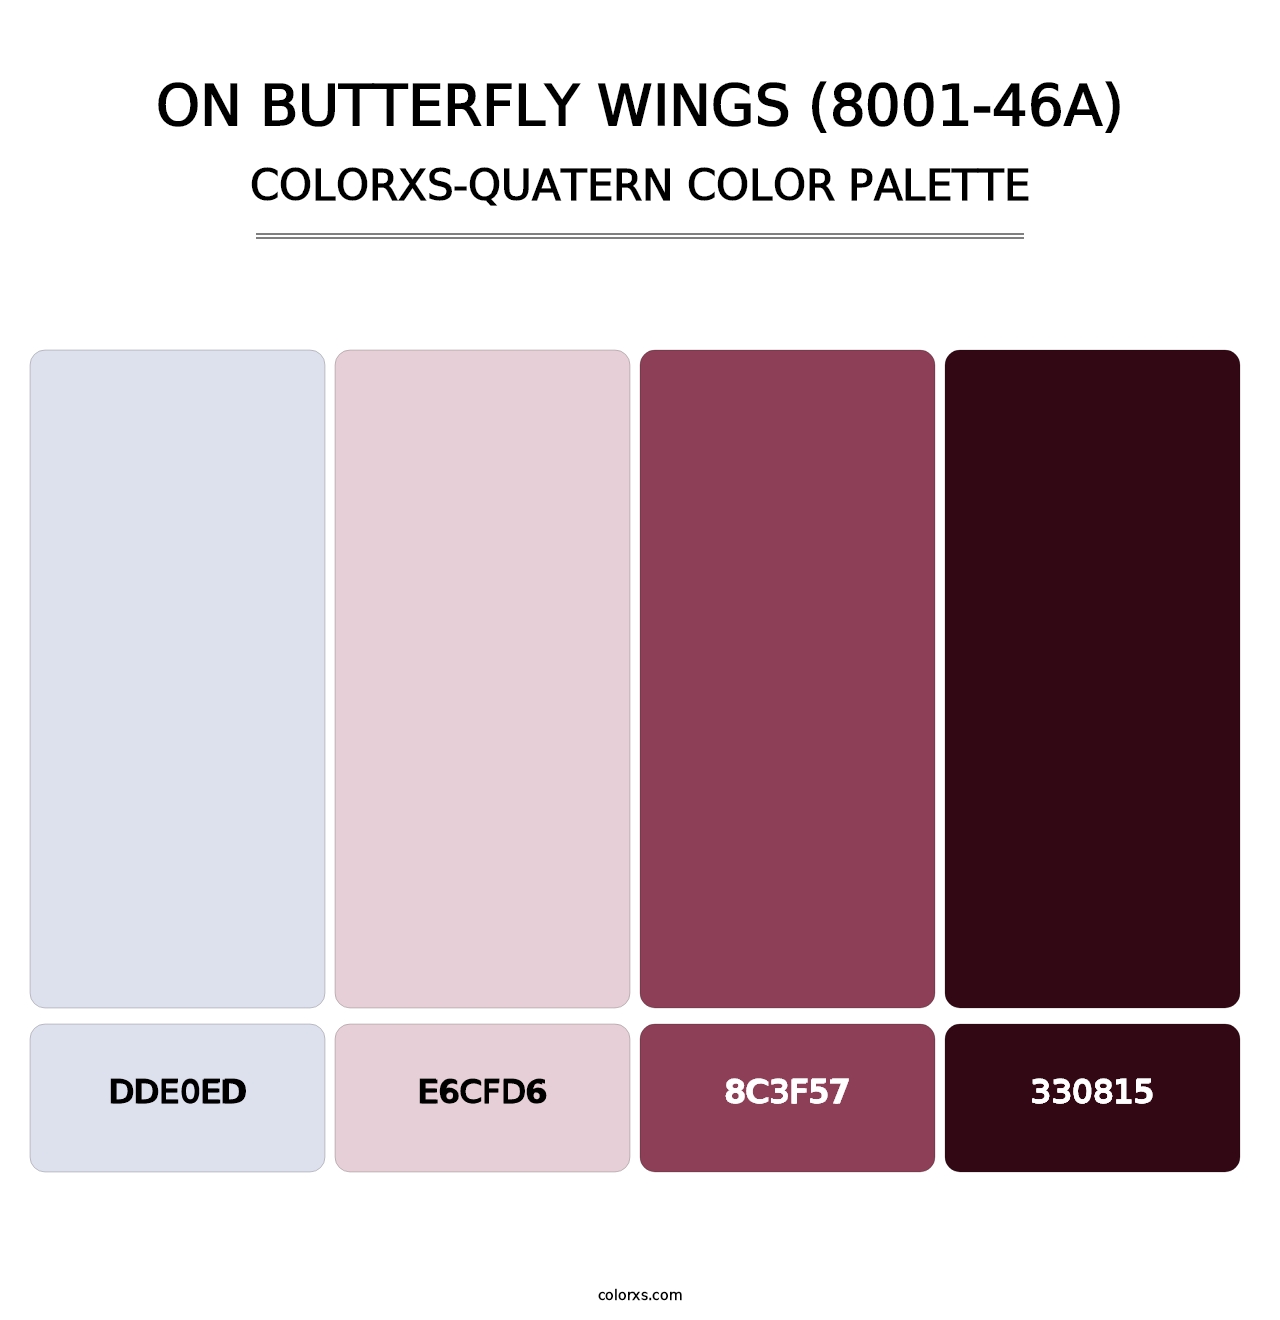 On Butterfly Wings (8001-46A) - Colorxs Quatern Palette